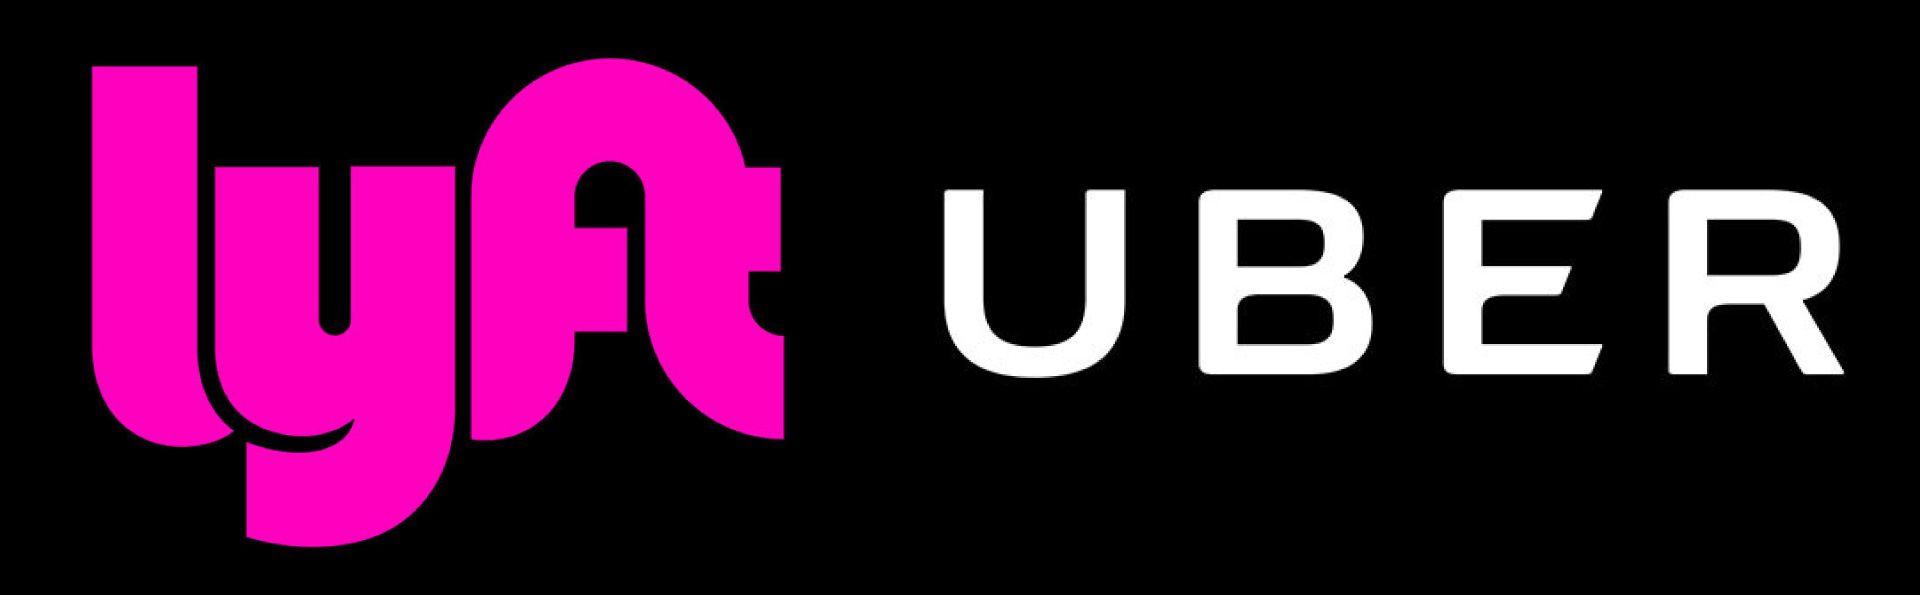 Official Lyft Logo - Best Economical Kia Models for Uber and Lyft Drivers of Quakertown